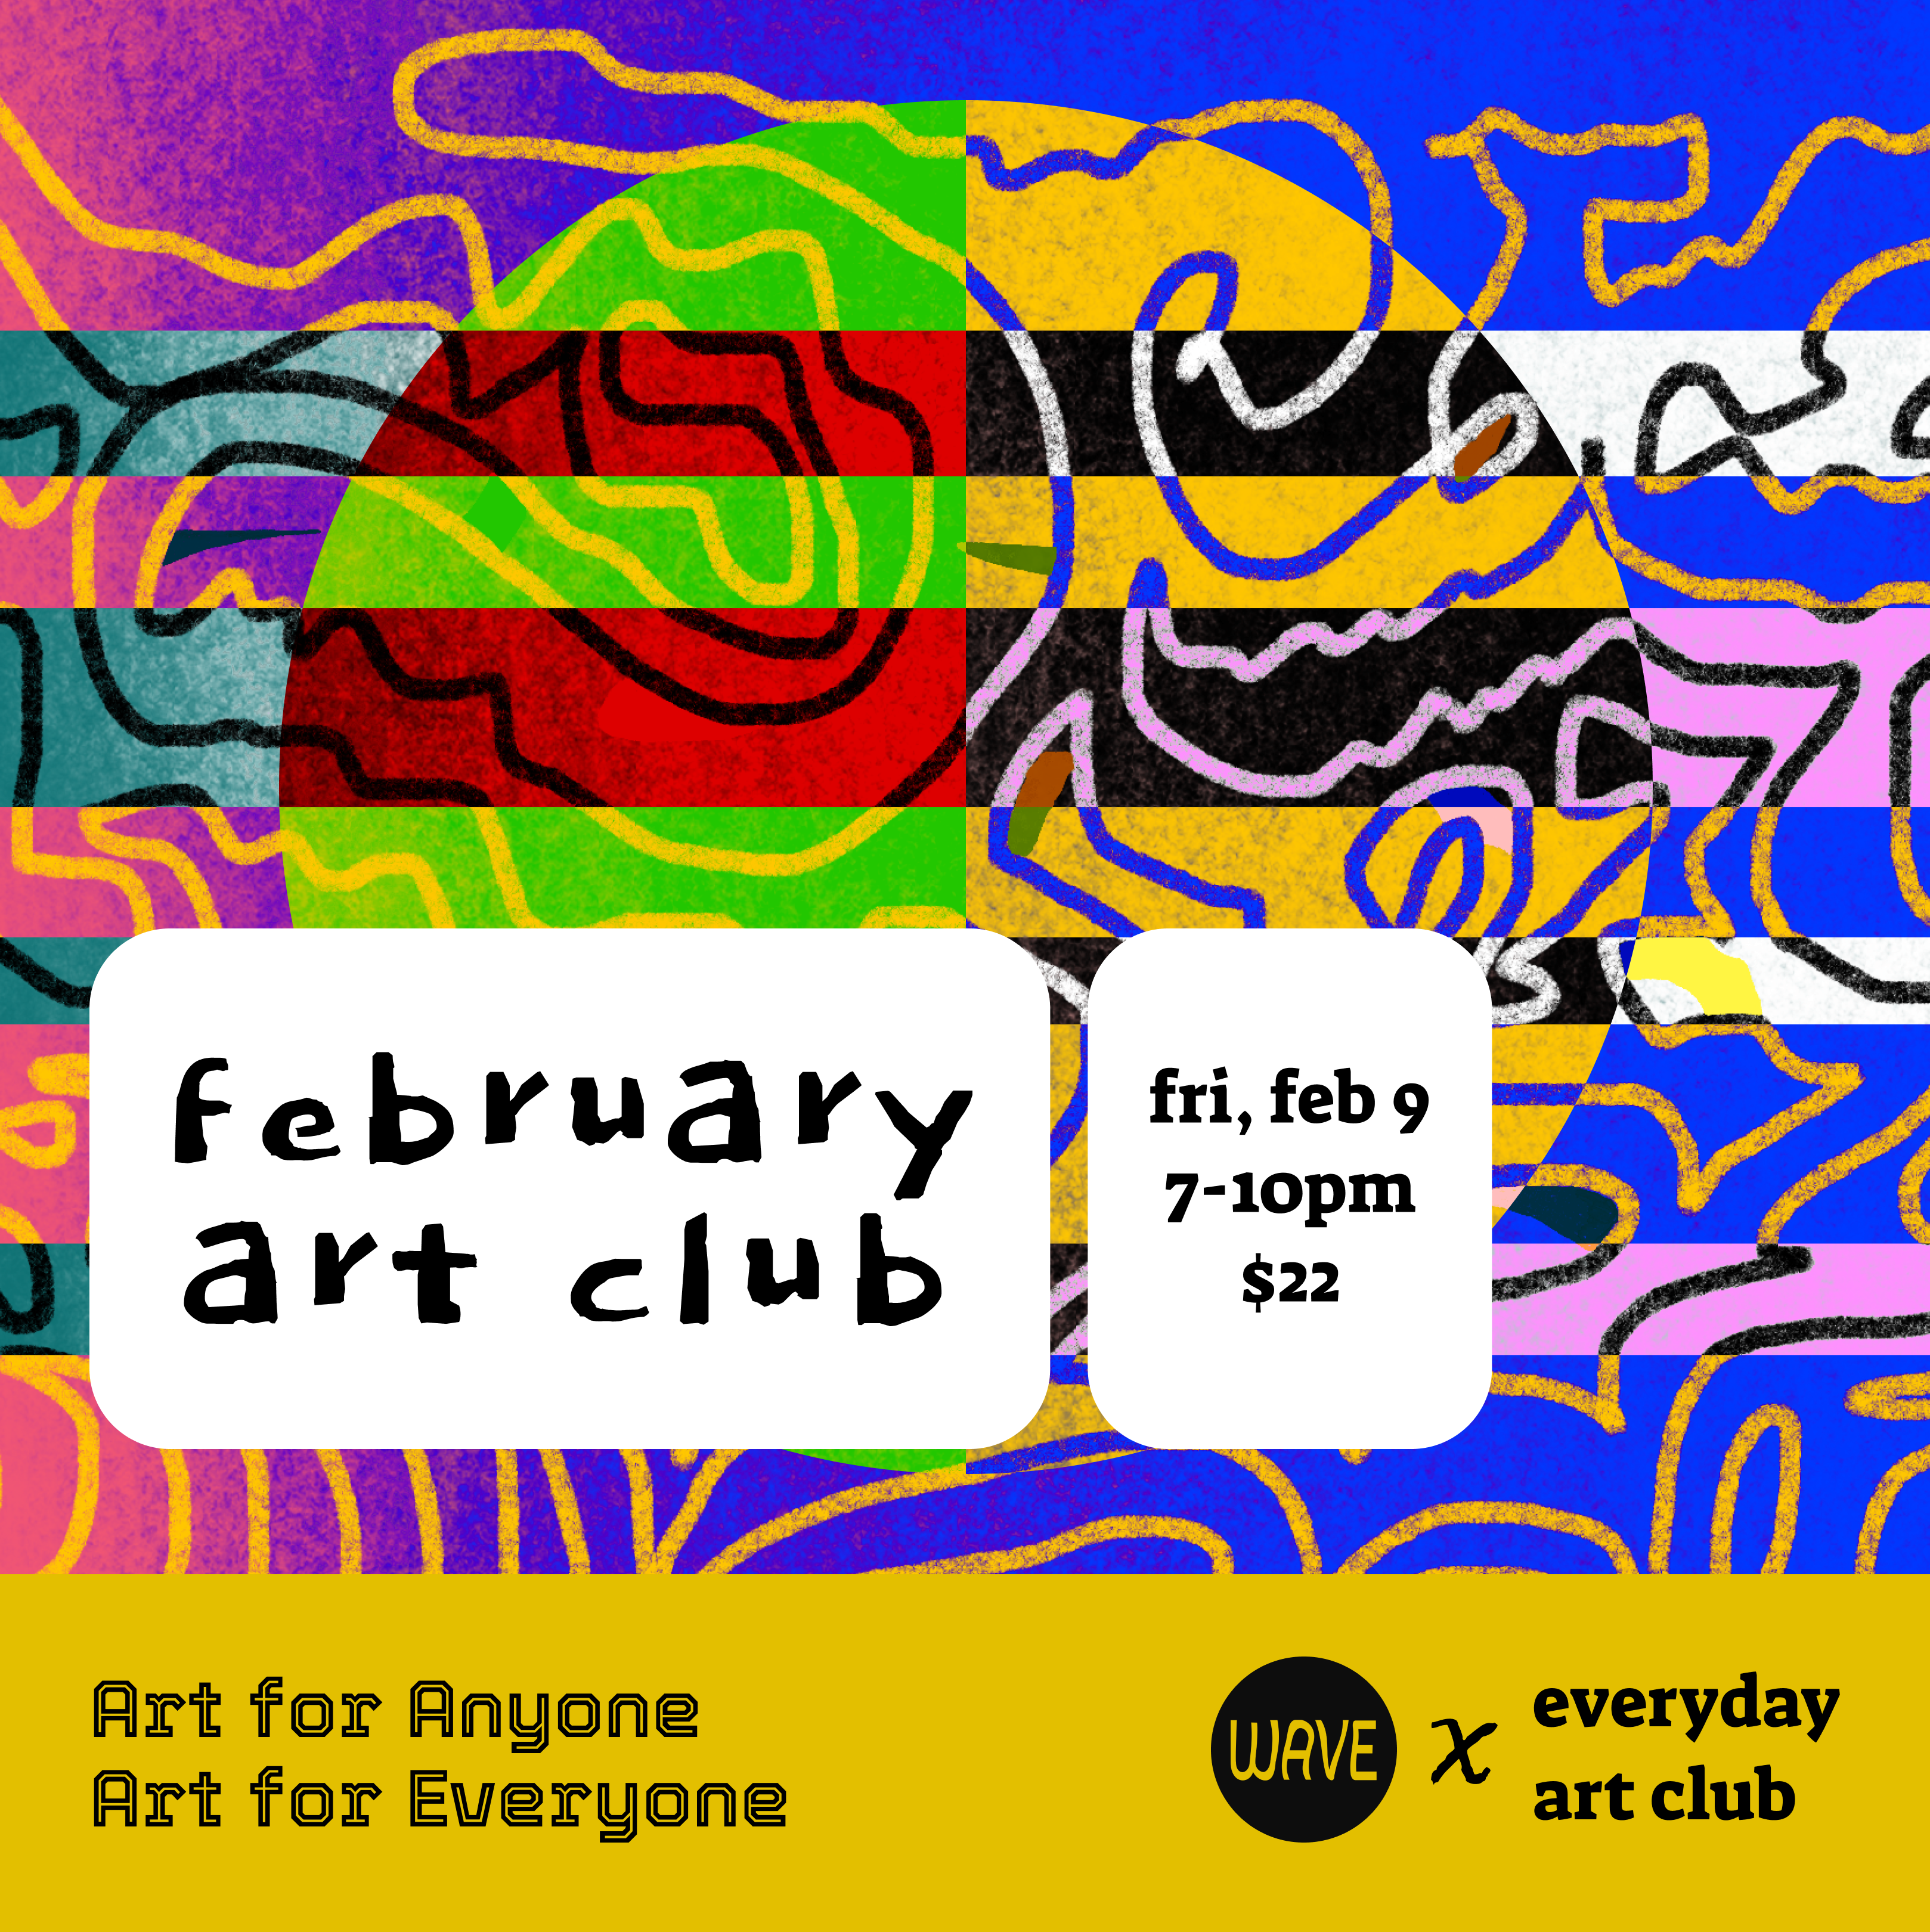 poster for an everyday art club event